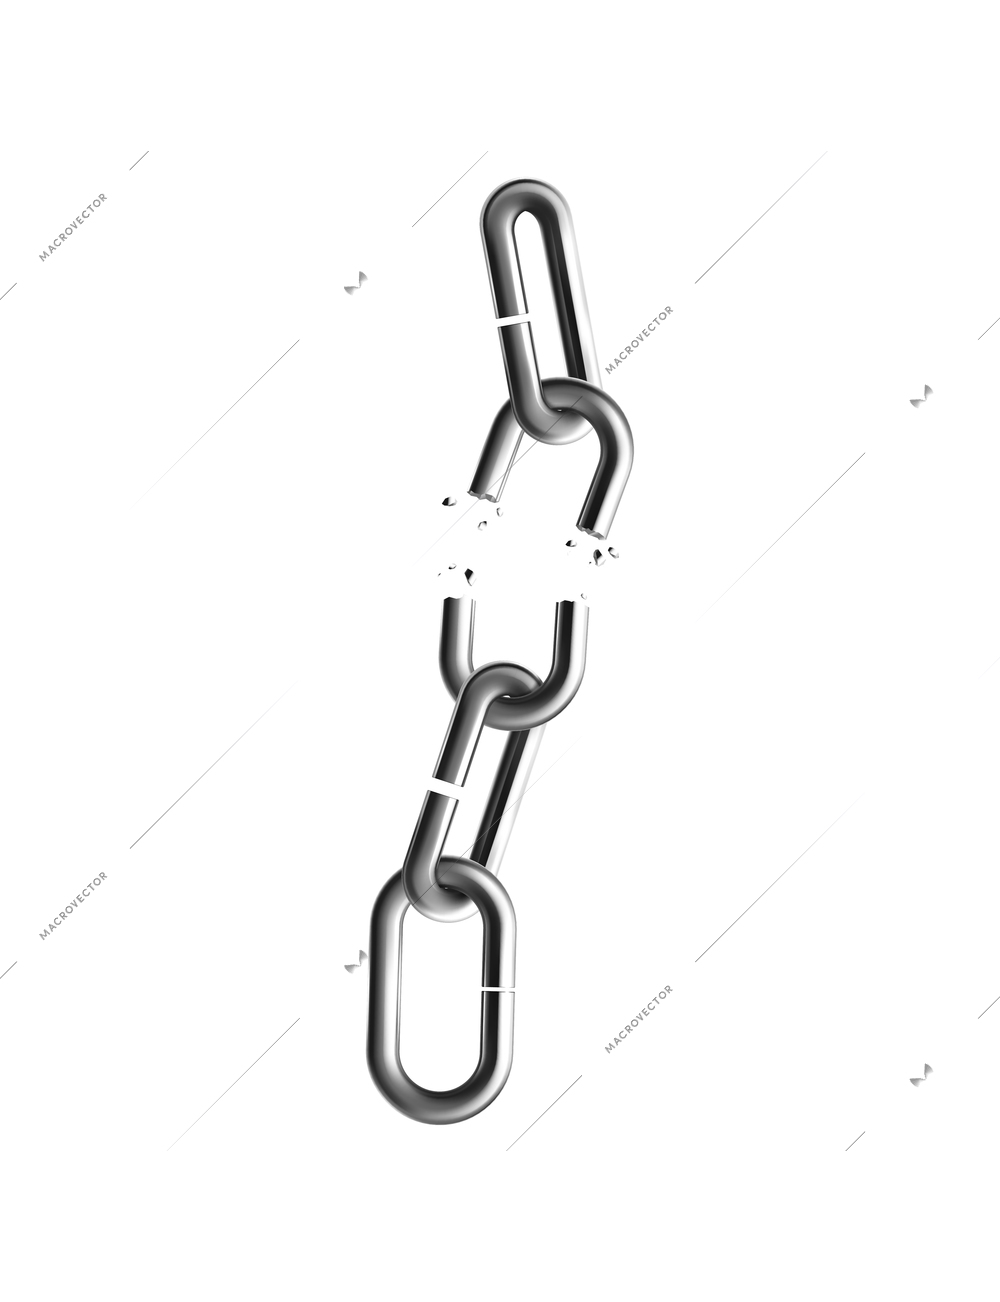 Metal rusty chain realistic composition with isolated images of breaking chain segments vector illustration